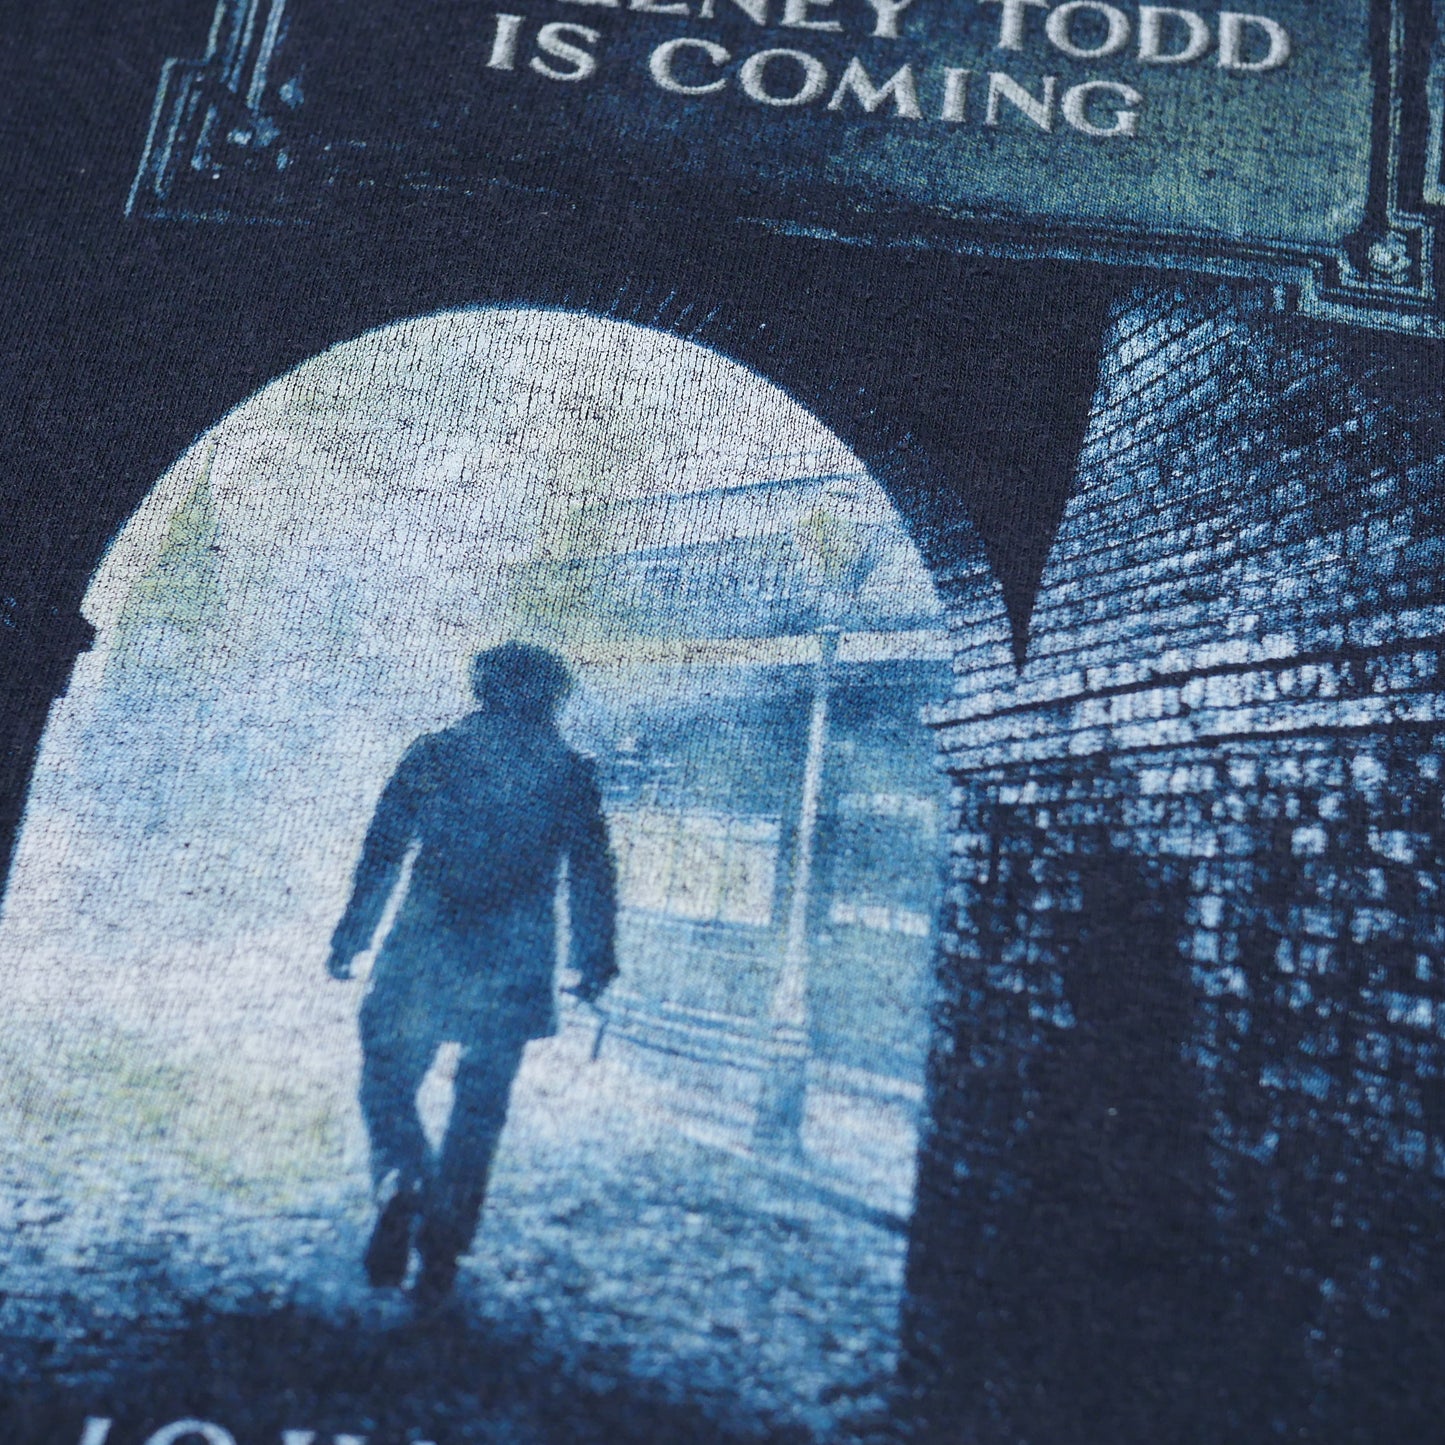 Beware Sweeney Todd is Coming Johnny Depp Movie Promo Shirt - Large